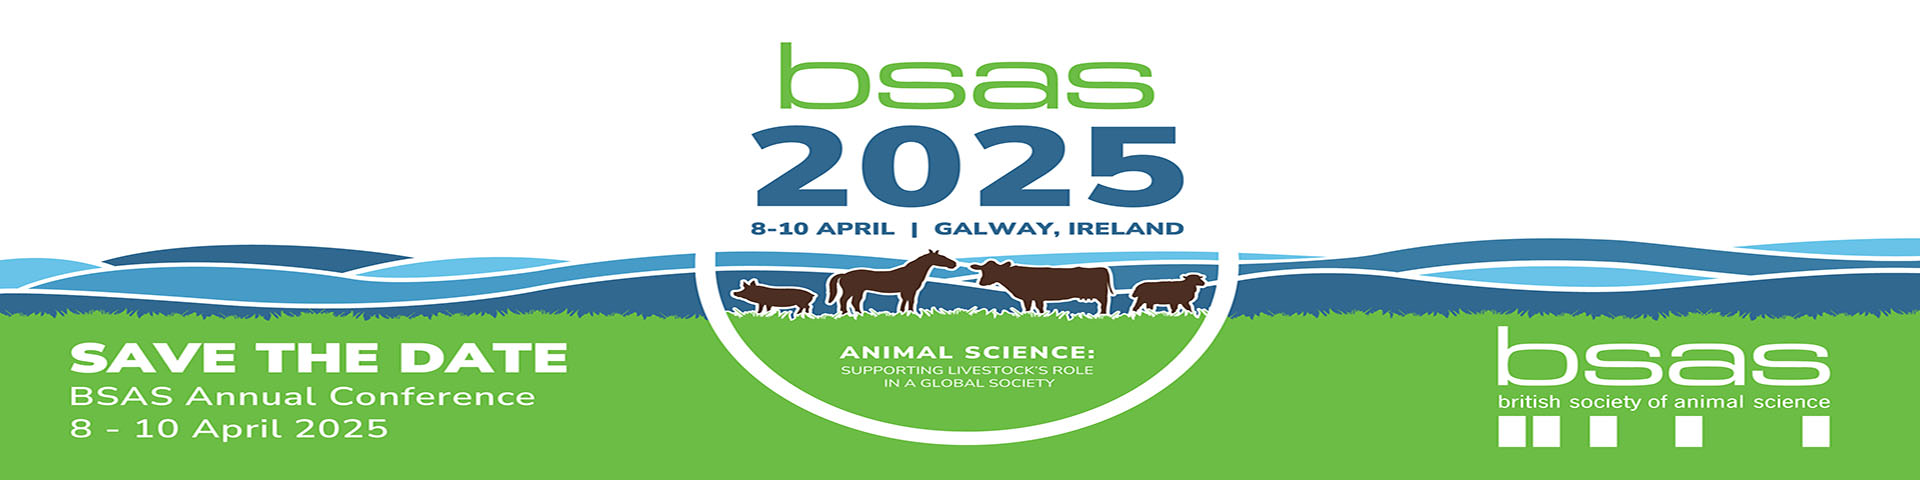 BSAS Conference 2025 Banner